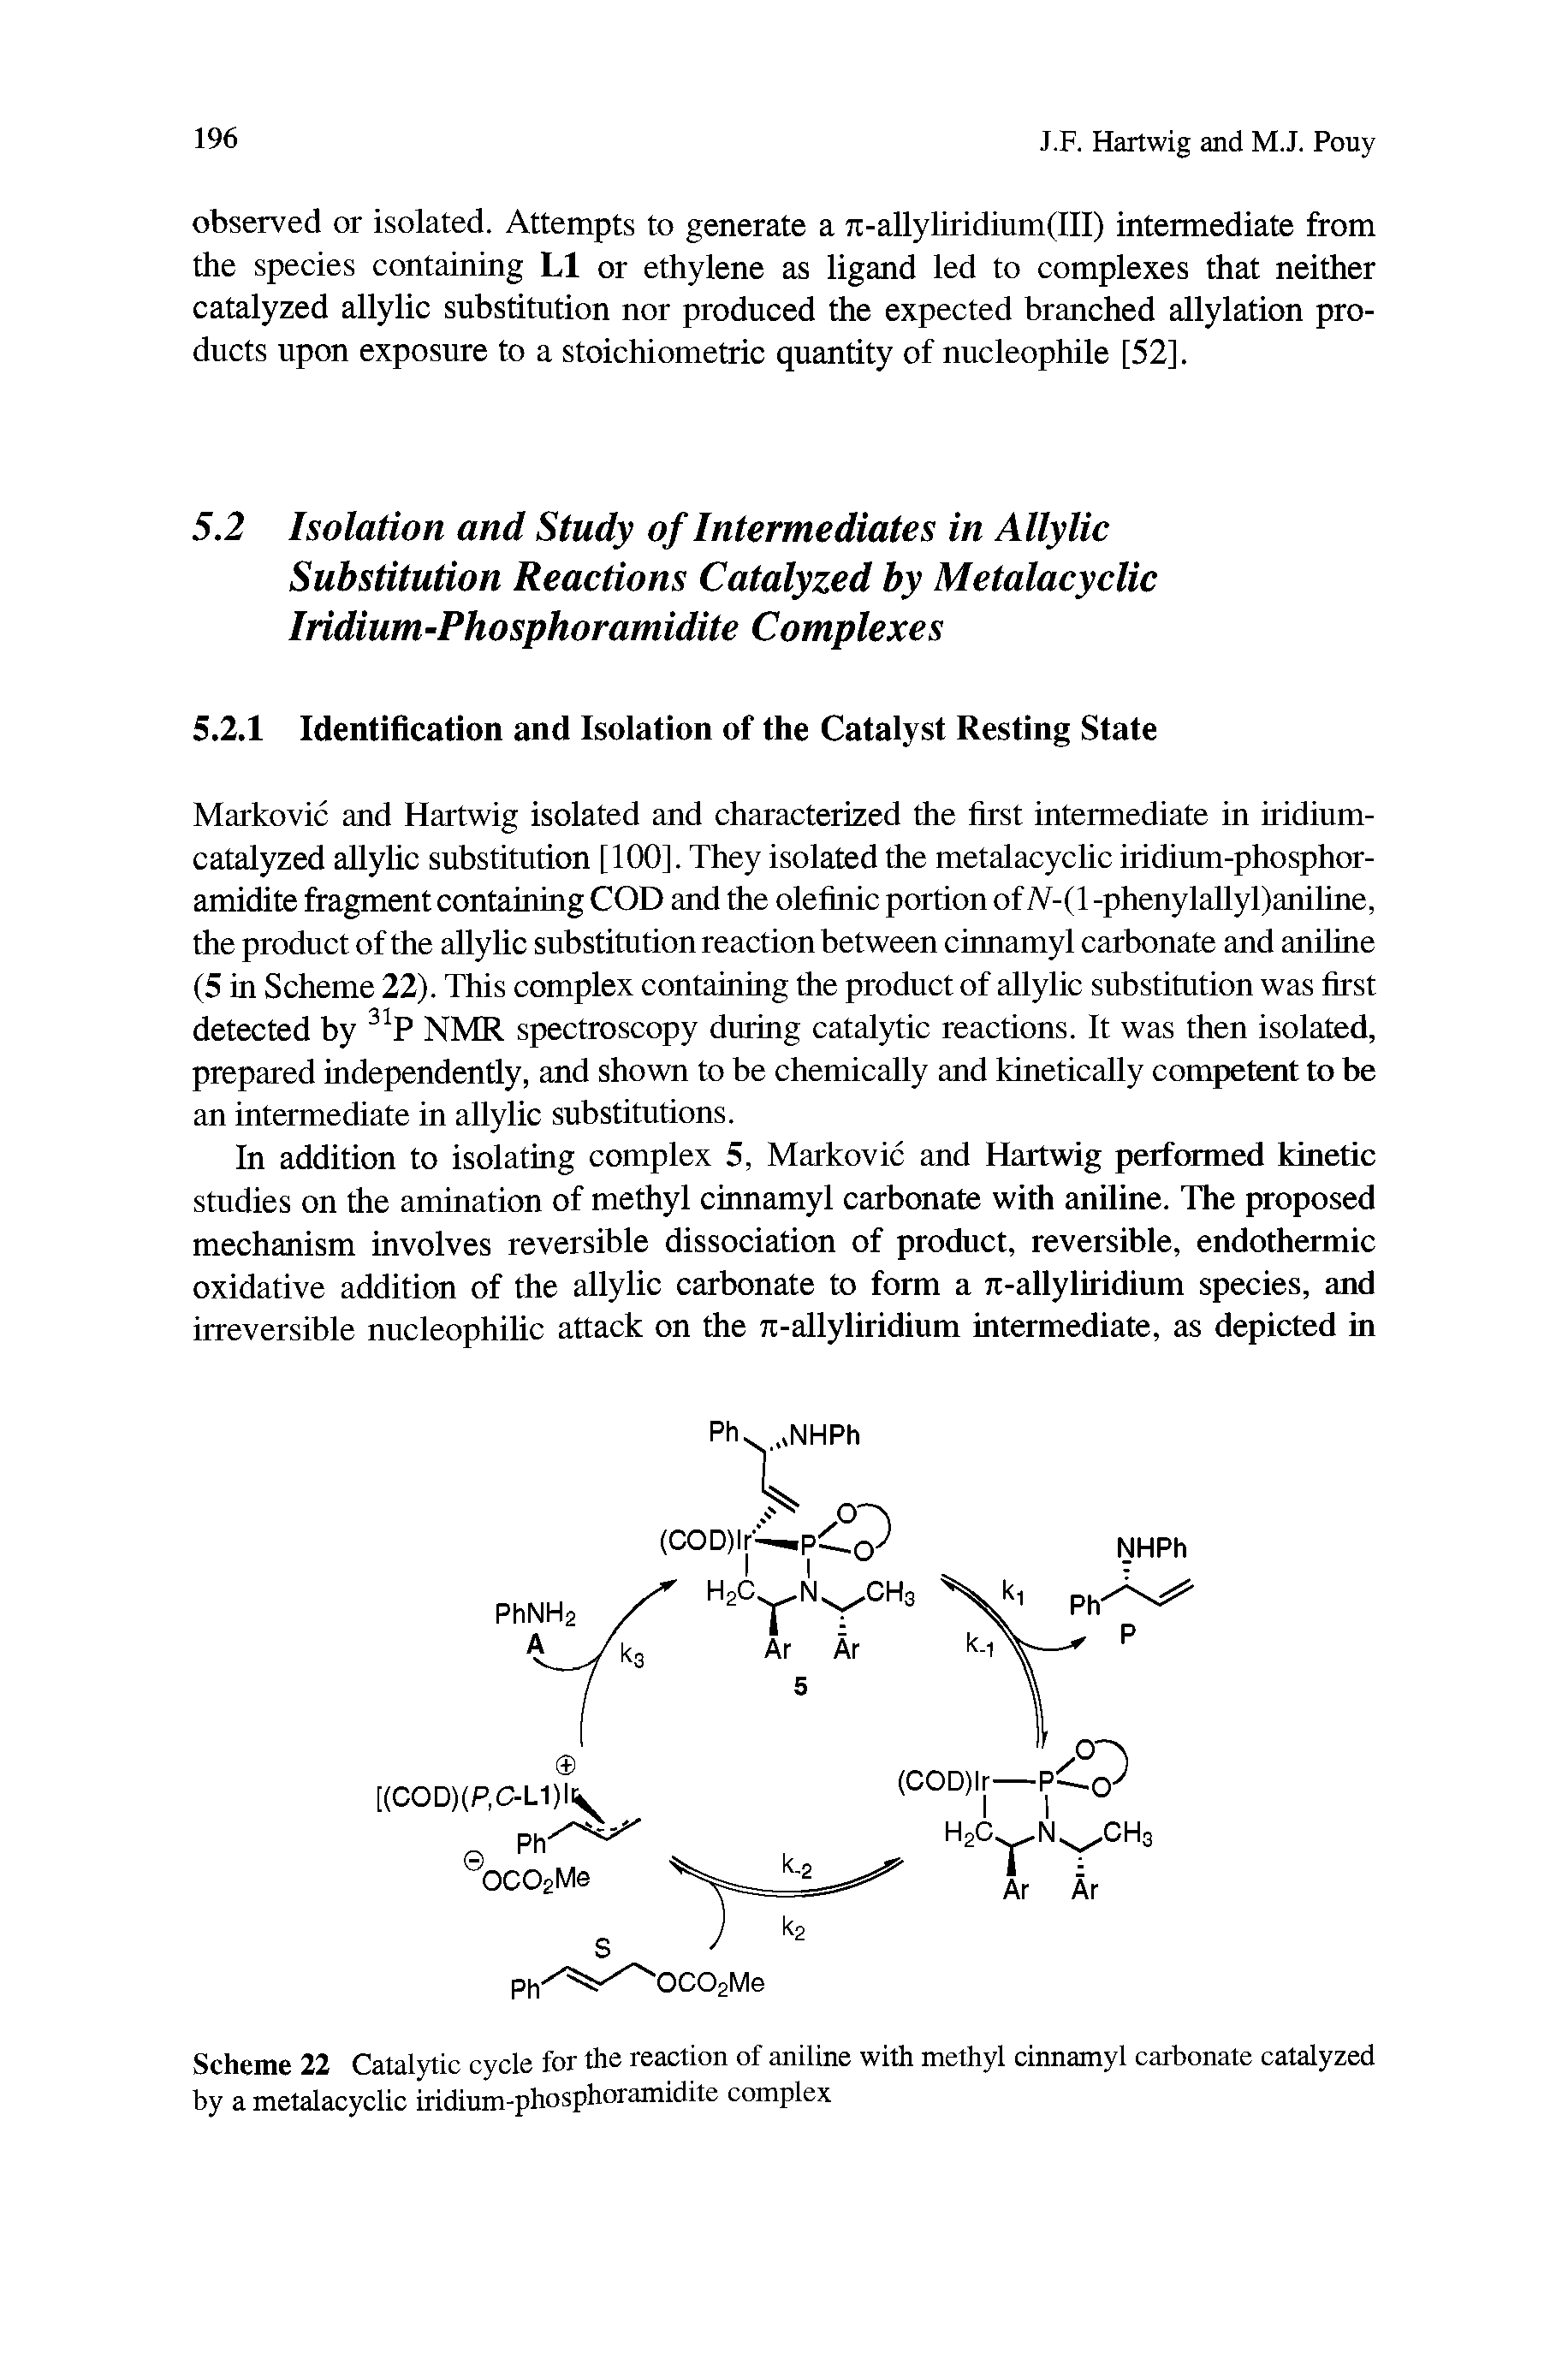 Scheme 22 Catalytic cycle for the reaction of aniline with methyl cinnamyl carbonate catalyzed by a metalacyclic iridium-phosphoramidite complex...